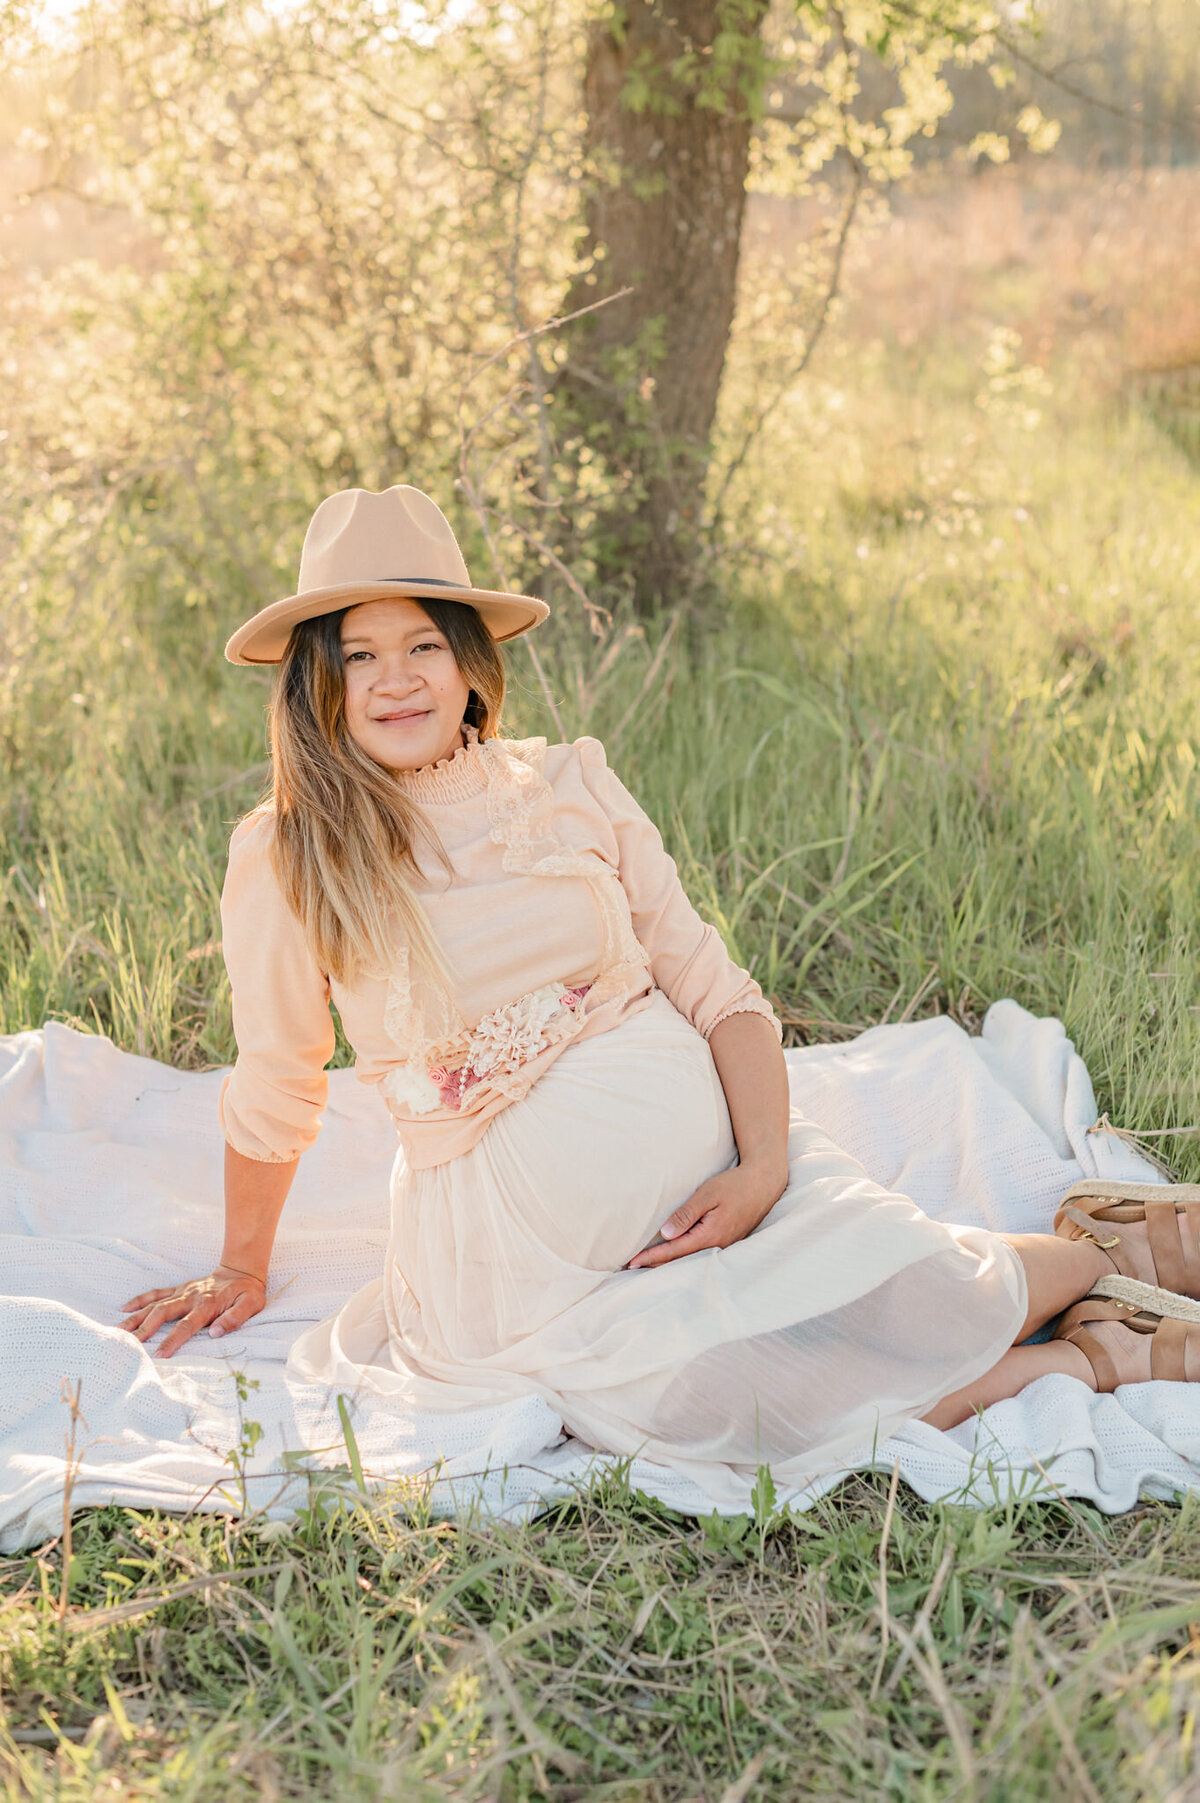 Expecting mom smiles at the camera, by San Antonio maternity photographer Cassie Golden.